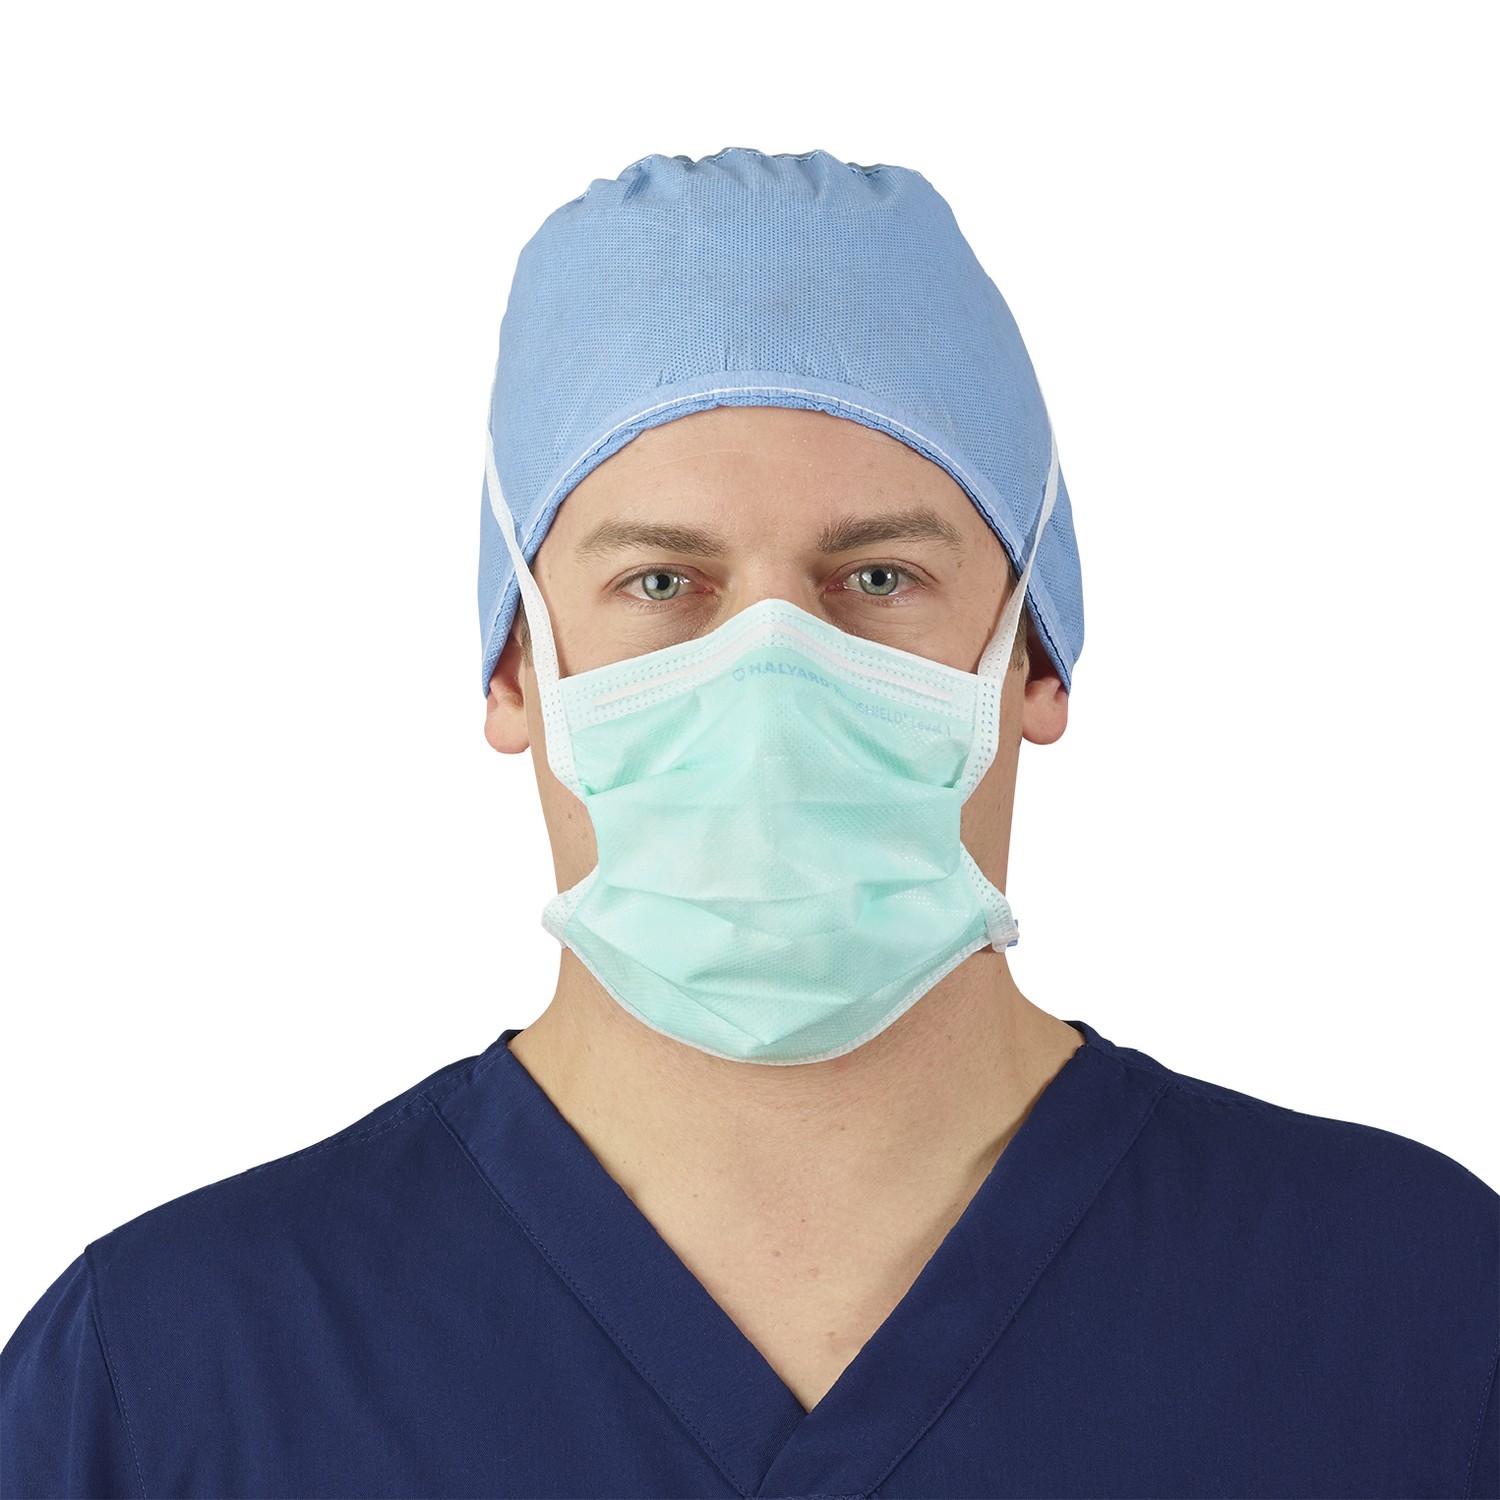 39125 ASTM F2100-11 Level 1 Halyard® Fluidshield® So-Soft® Surgical Masks with Smart Adhesive